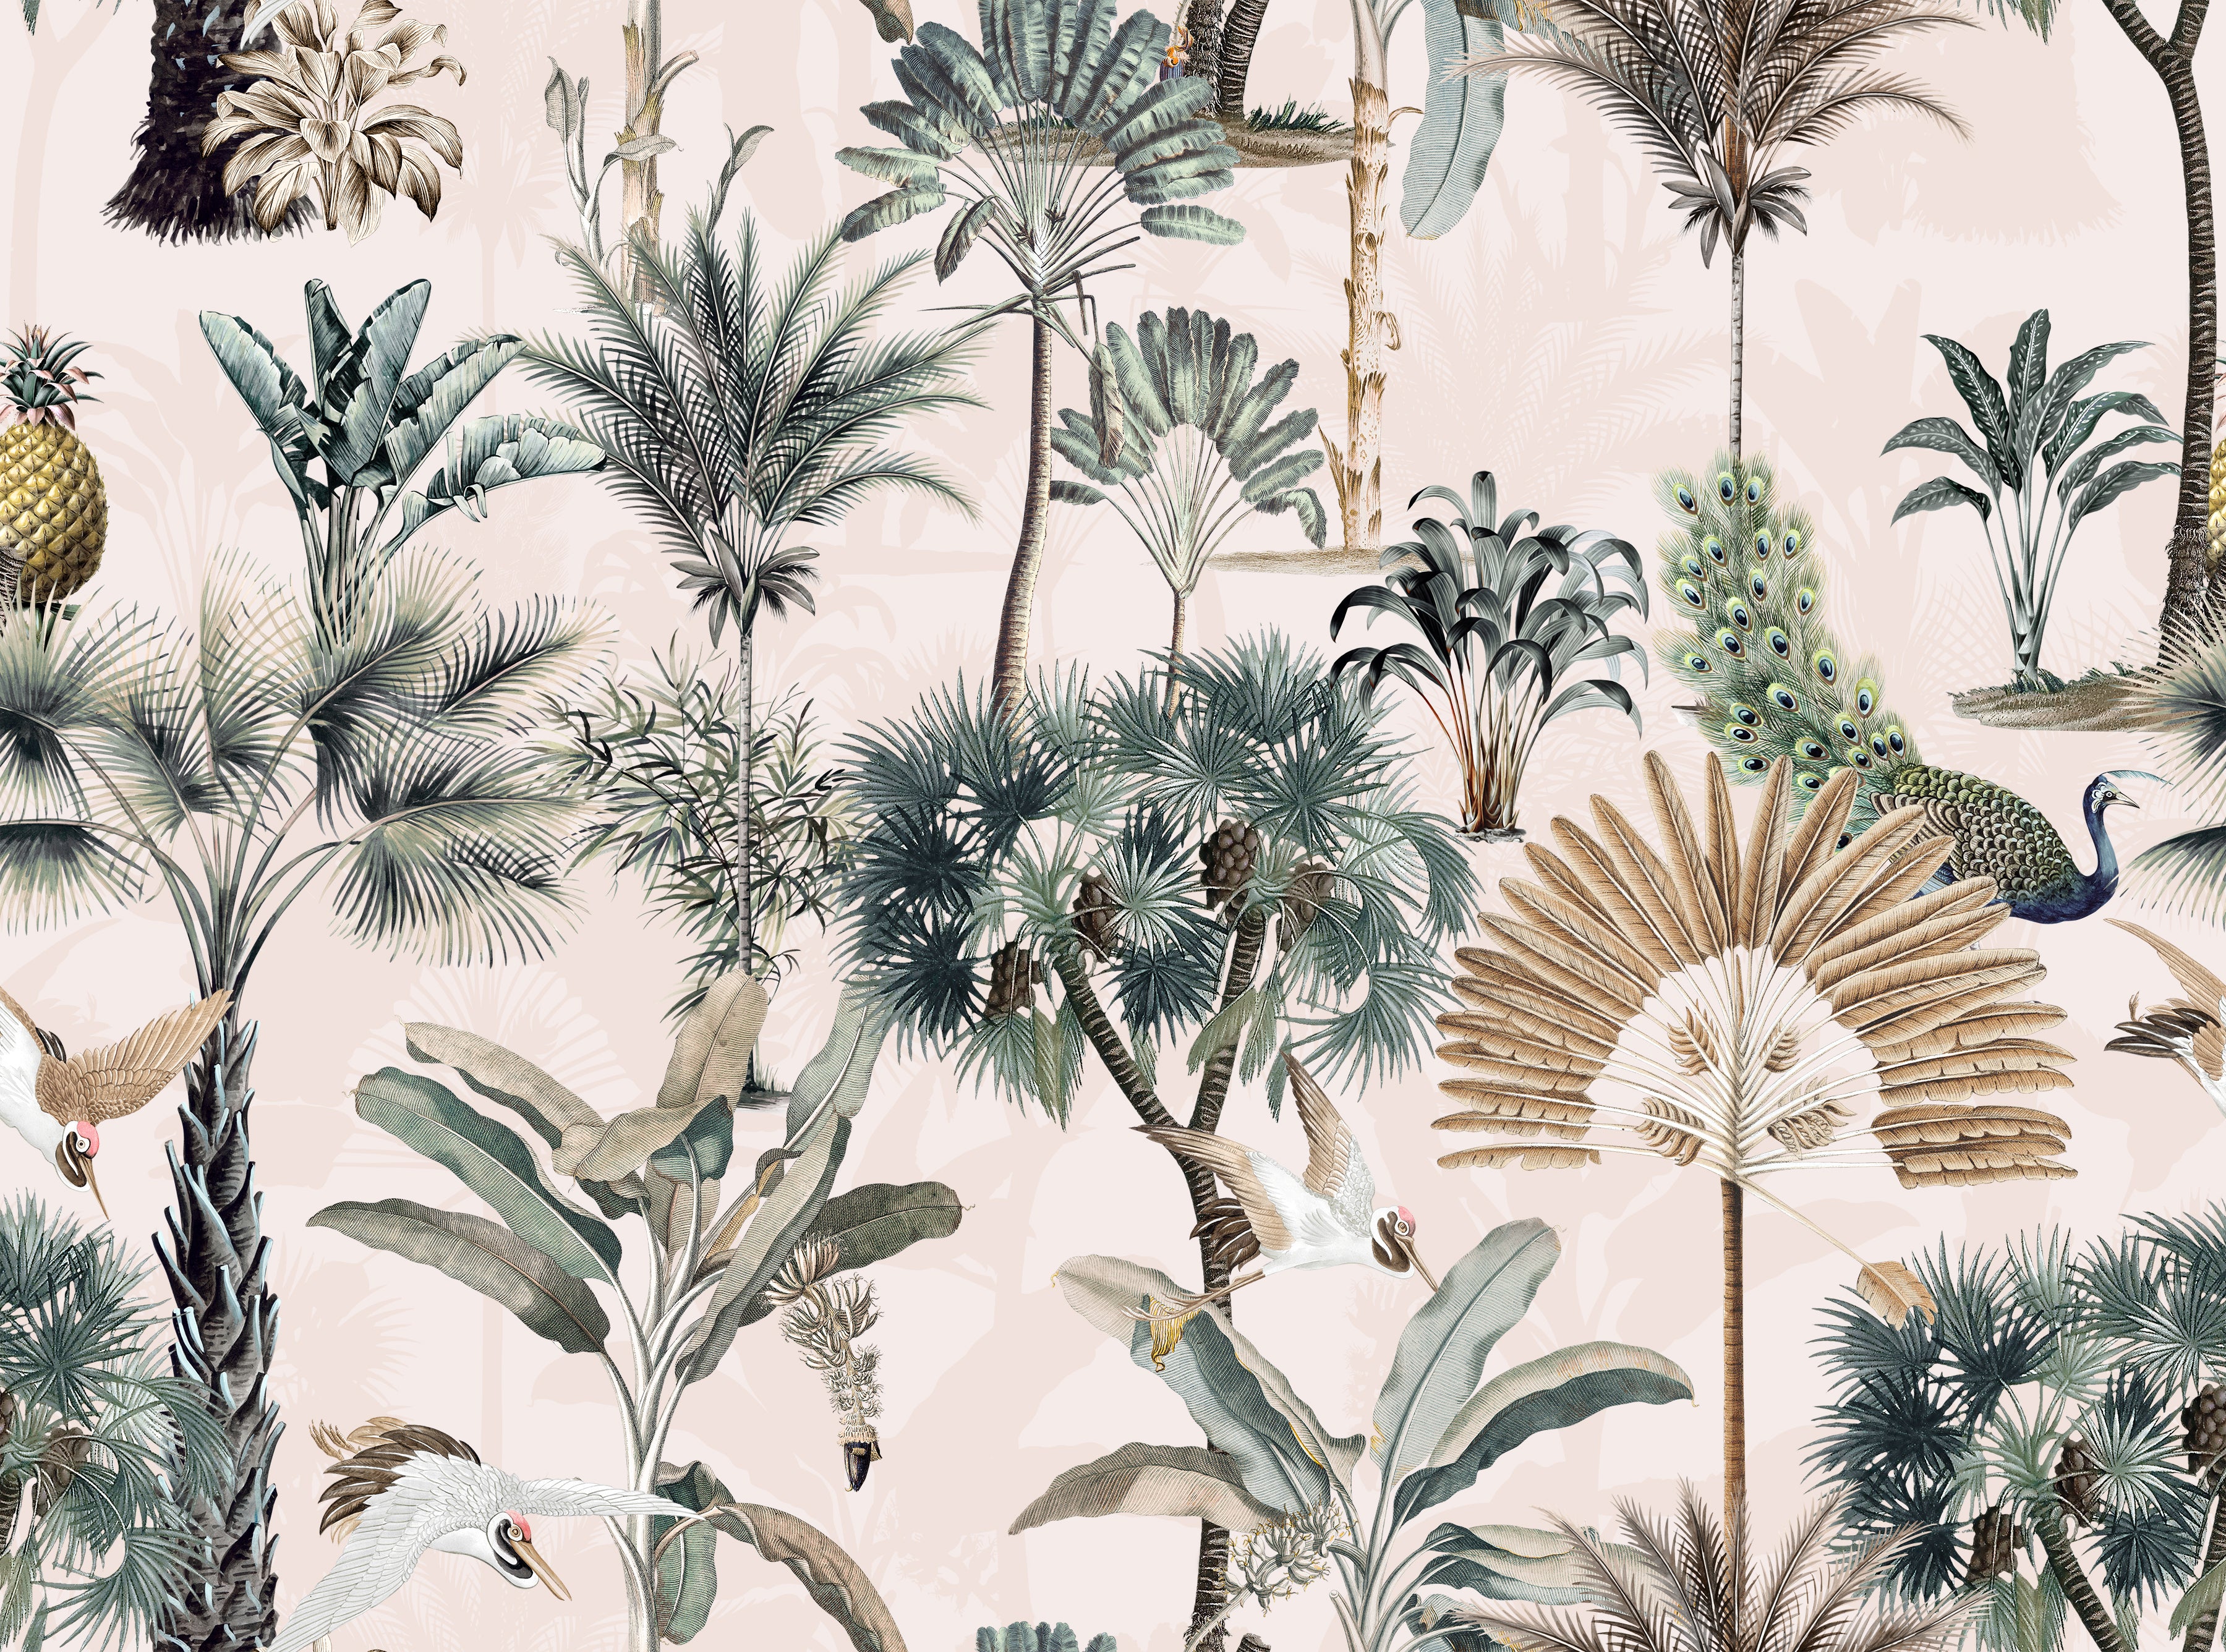 Detailed view of Exotic Tropical Wallpaper featuring various palm trees, birds, and a peacock amidst tropical foliage.